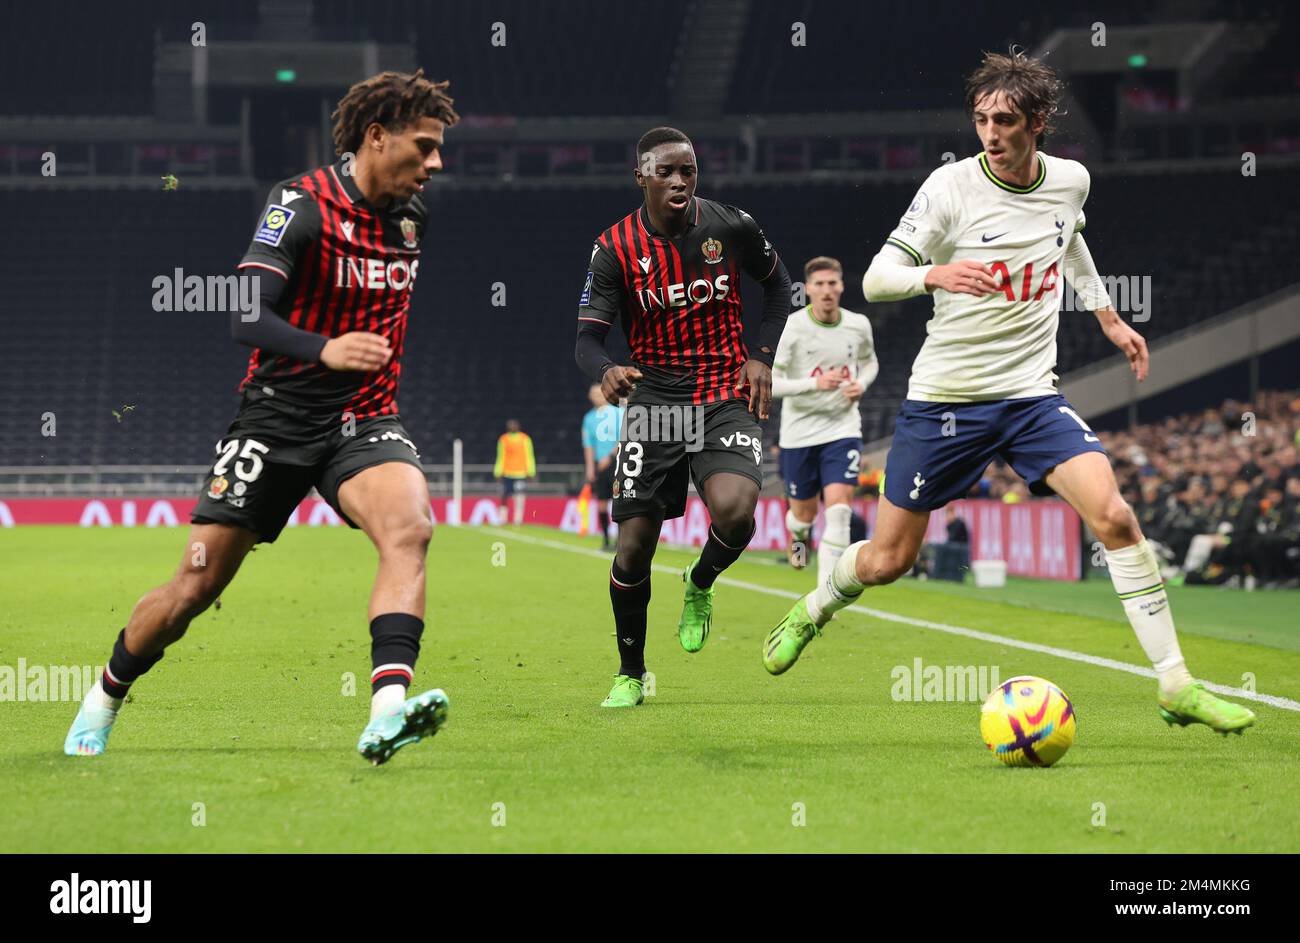 L-R Jean-Clair Todibo and Antoine Mendy  of OGC Nice and Tottenham Hotspur's Bryan Gil during the Friendly soccer match between Tottenham Hotspur and Stock Photo